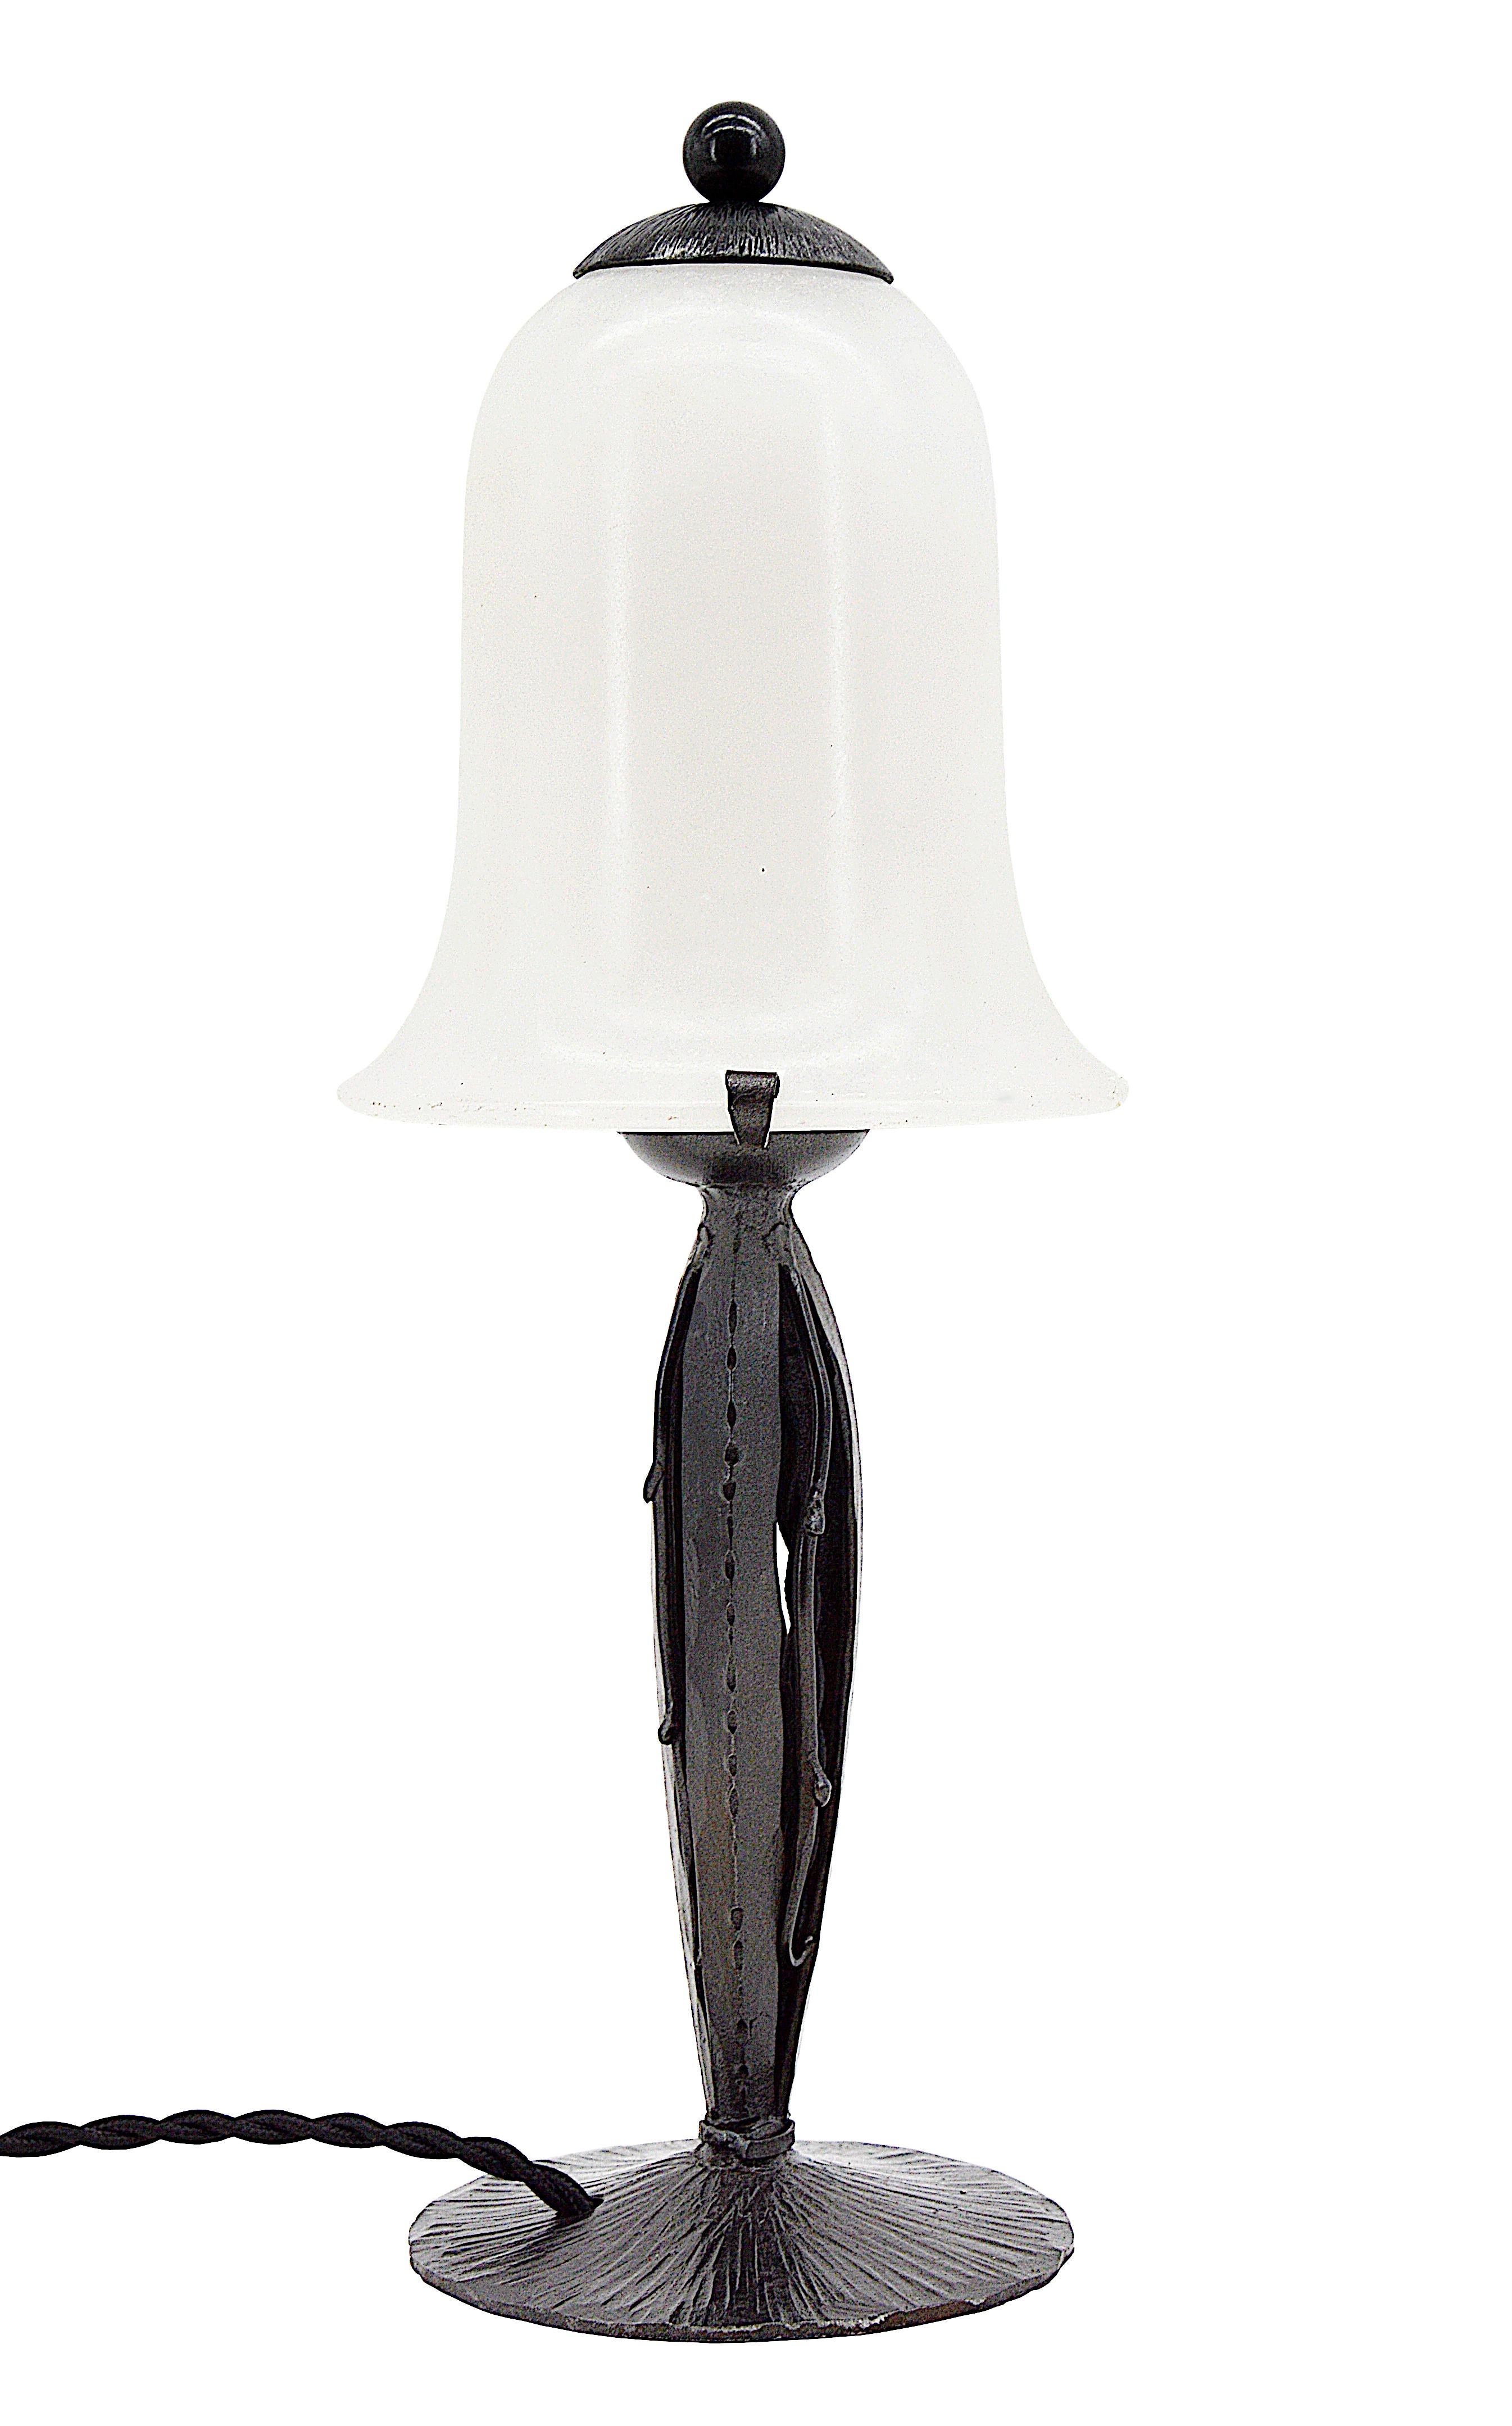 French Art Deco table lamp, France, 1920s. Wrought-iron base. Alabaster shade. Measures: Height 12.3